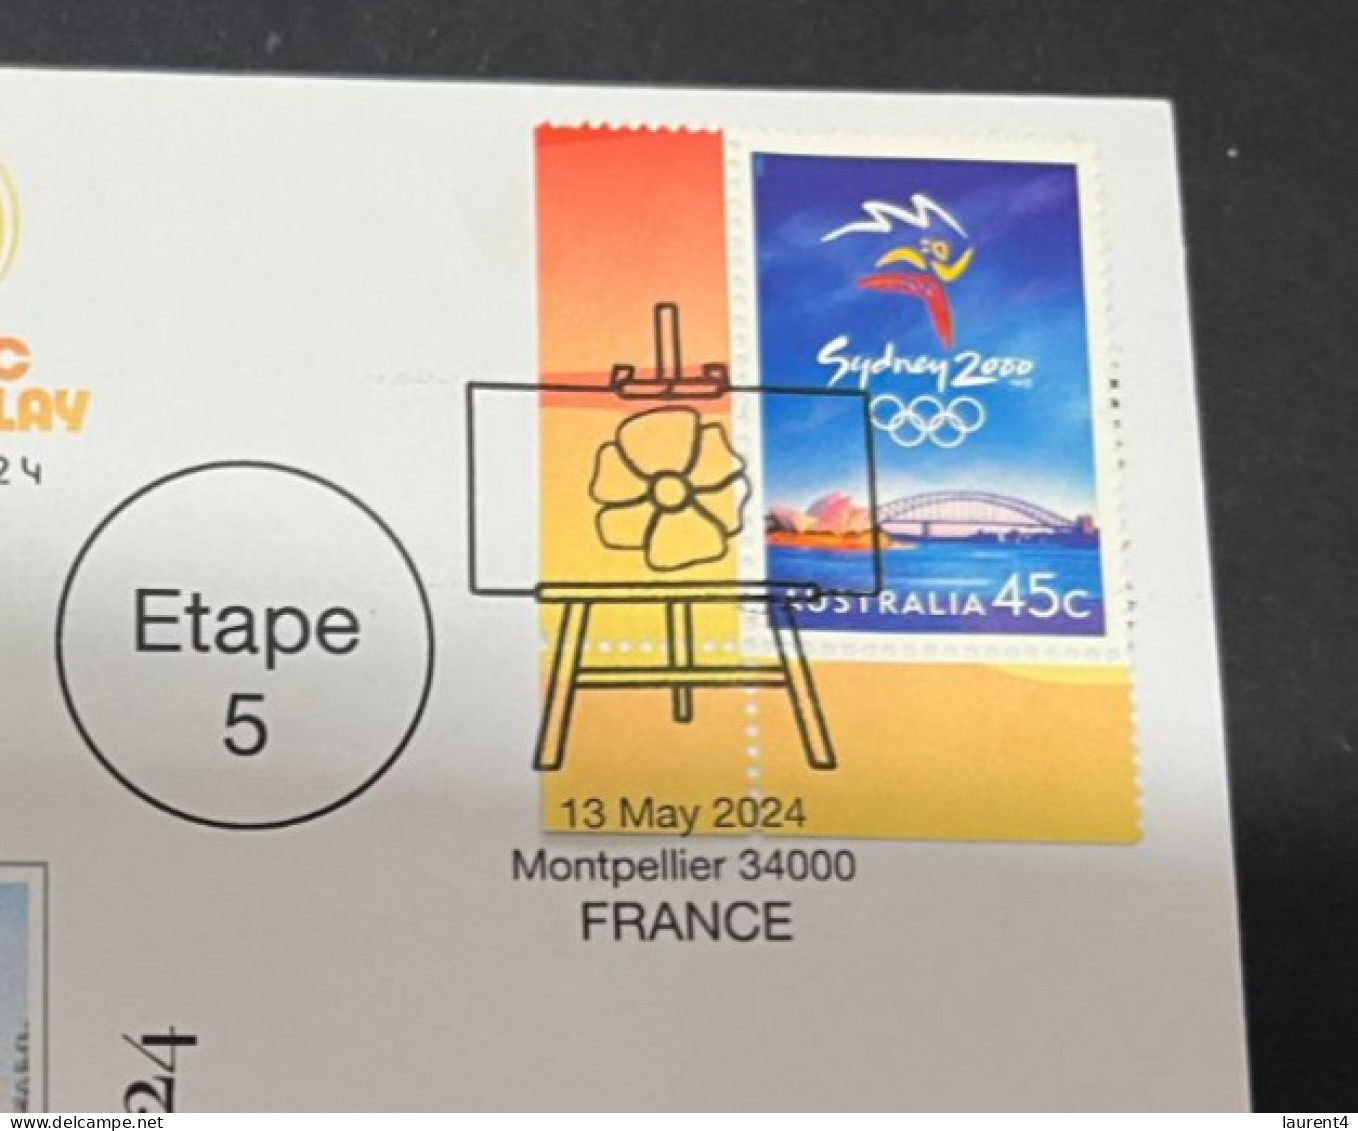 14-5-2024 (5 Z 7) Paris Olympic Games 2024 - Torch Relay (Etape 5) In Montpellier (13-5-2024) With OLYMPIC Stamp - Eté 2024 : Paris